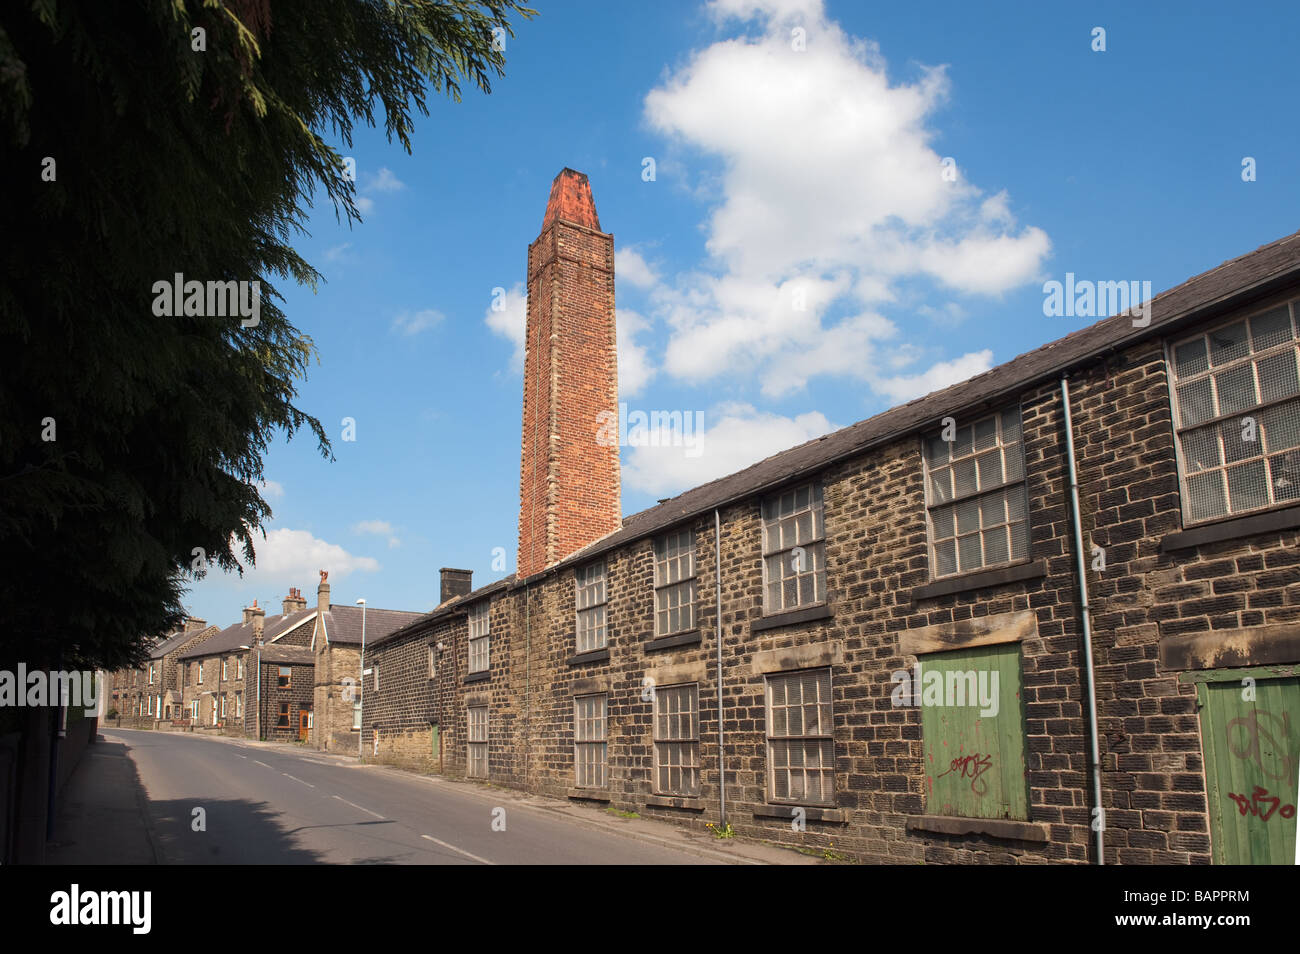 'Hawleys Saw Mill' dans Penistone,'Sud' Yorkshire, Angleterre Banque D'Images